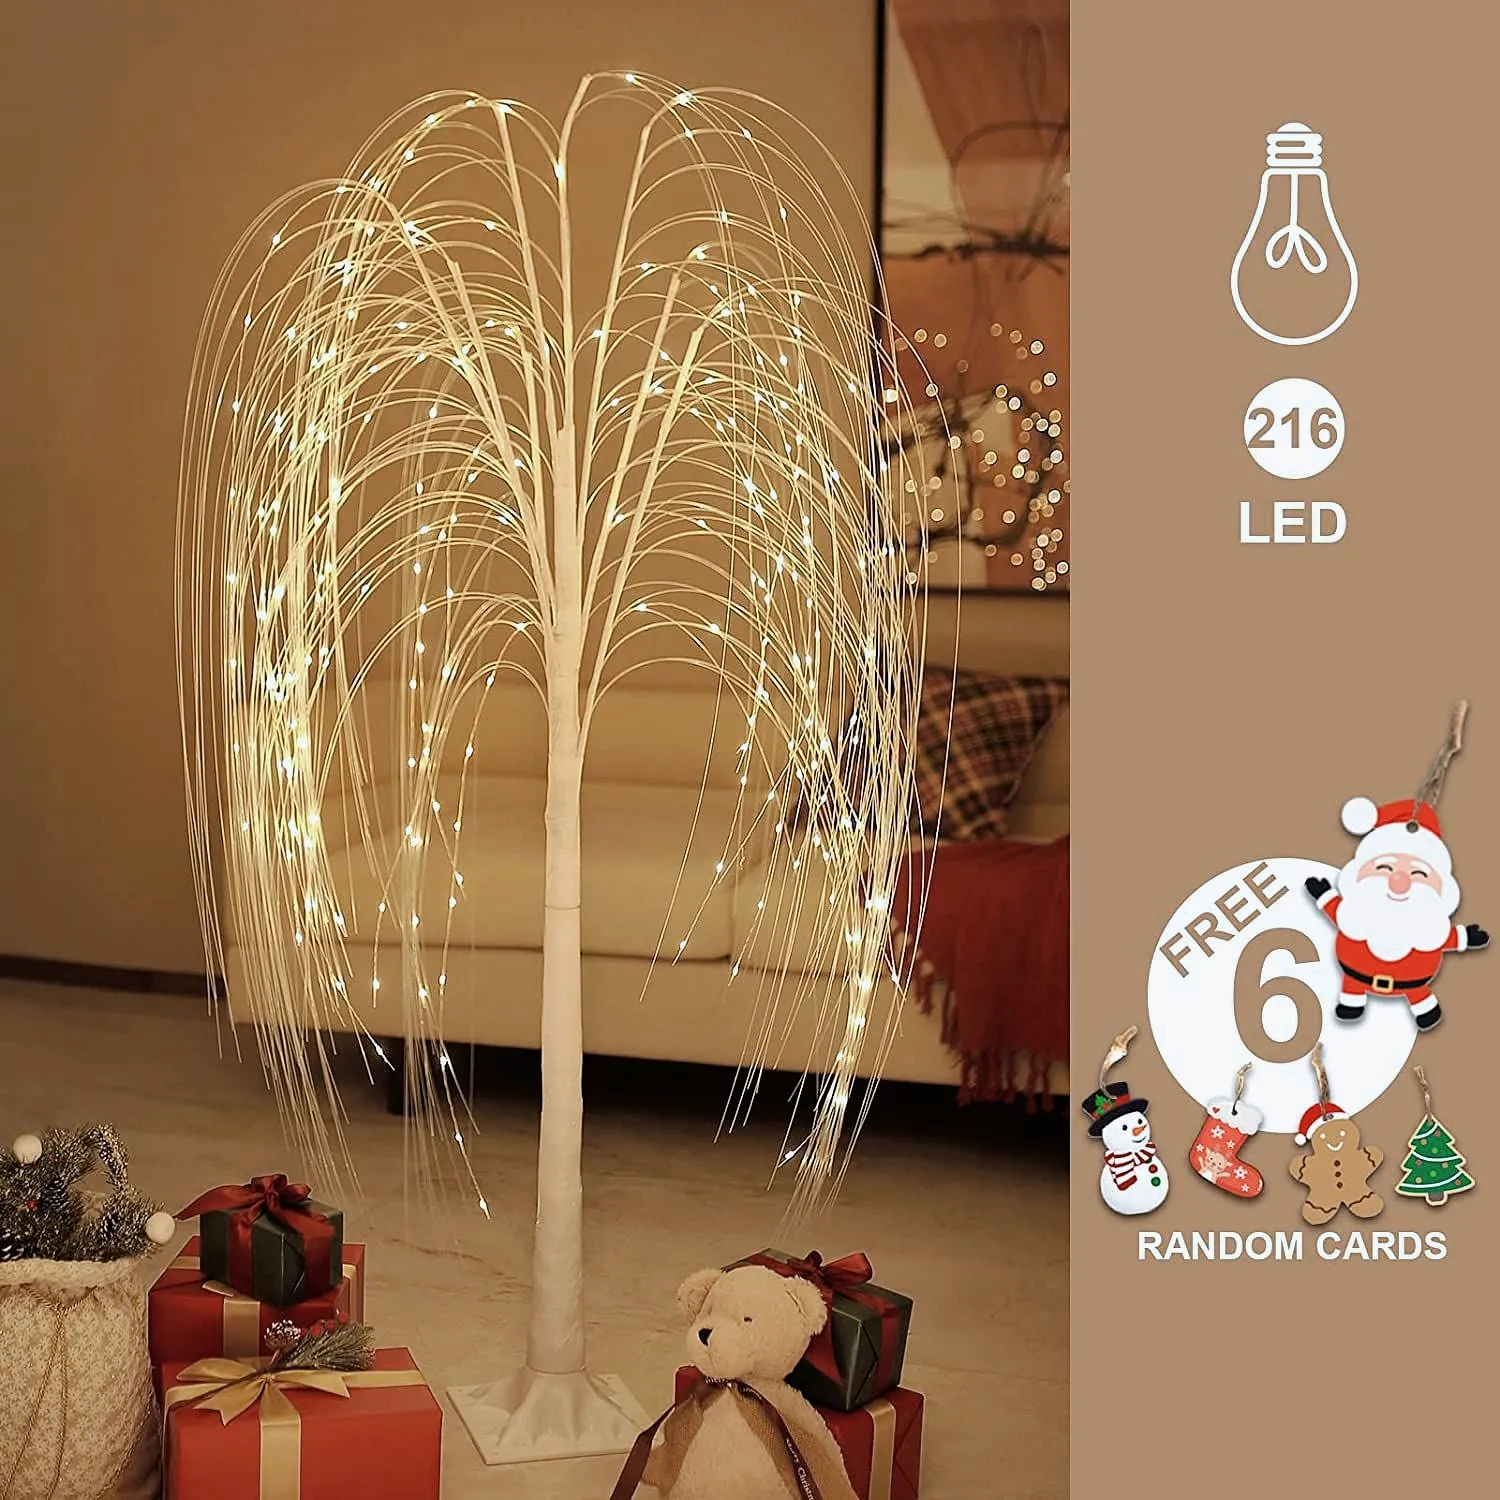 1.5m Fairy Christmas Willow Tree LED Motif Lights Warm White For Indoor Outdoor Halloween Party Wedding Garden